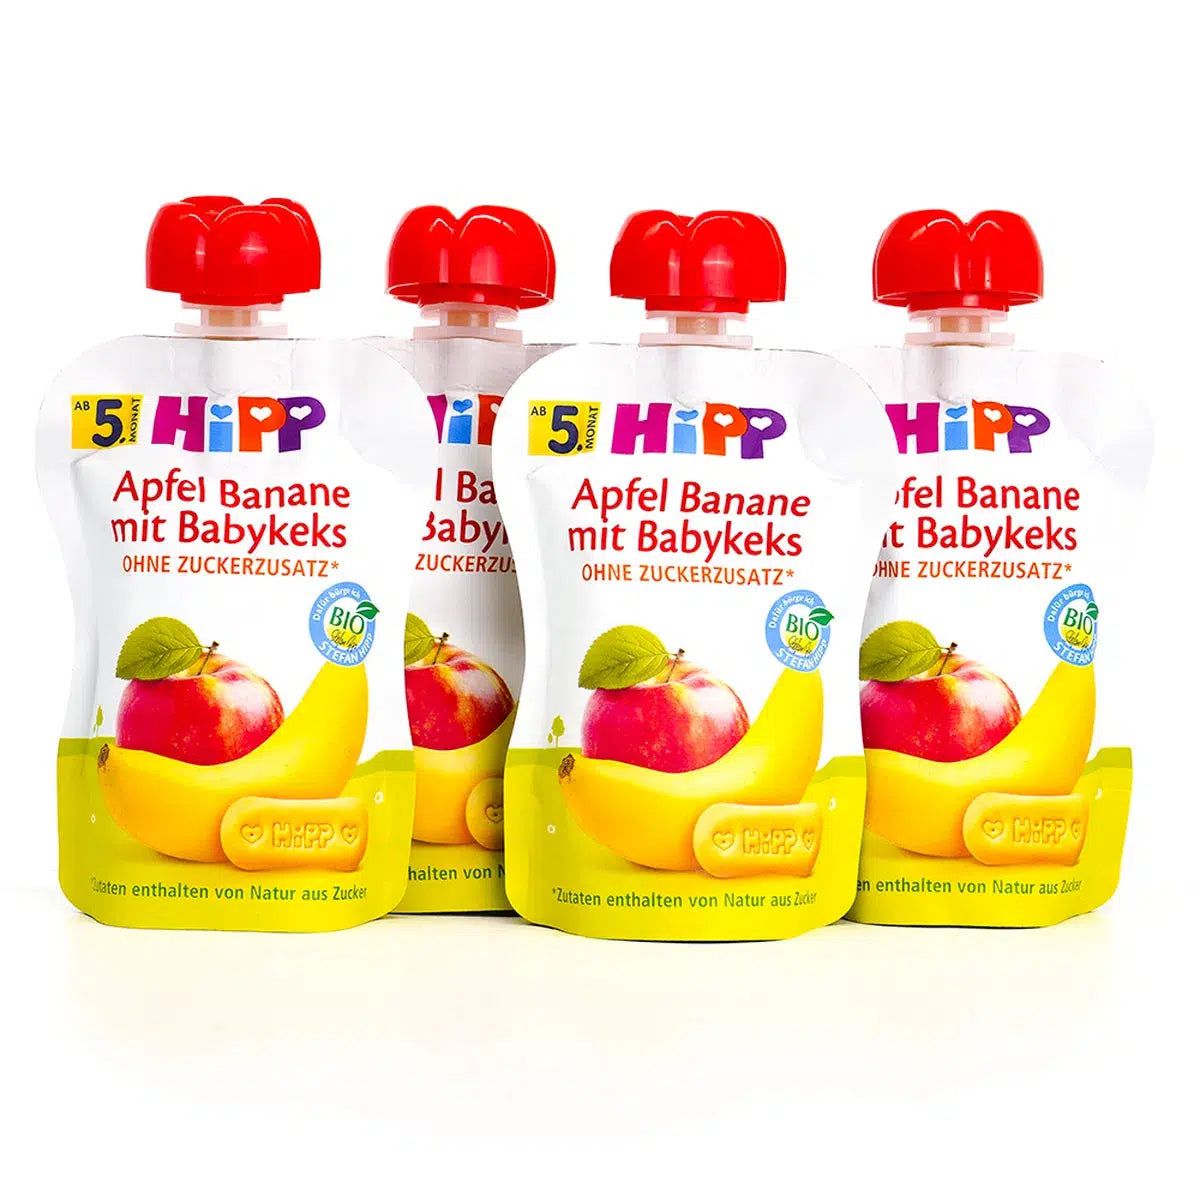 HiPP Organic Baby Milk Biscuits, Best Pricing & Same Day Shipping